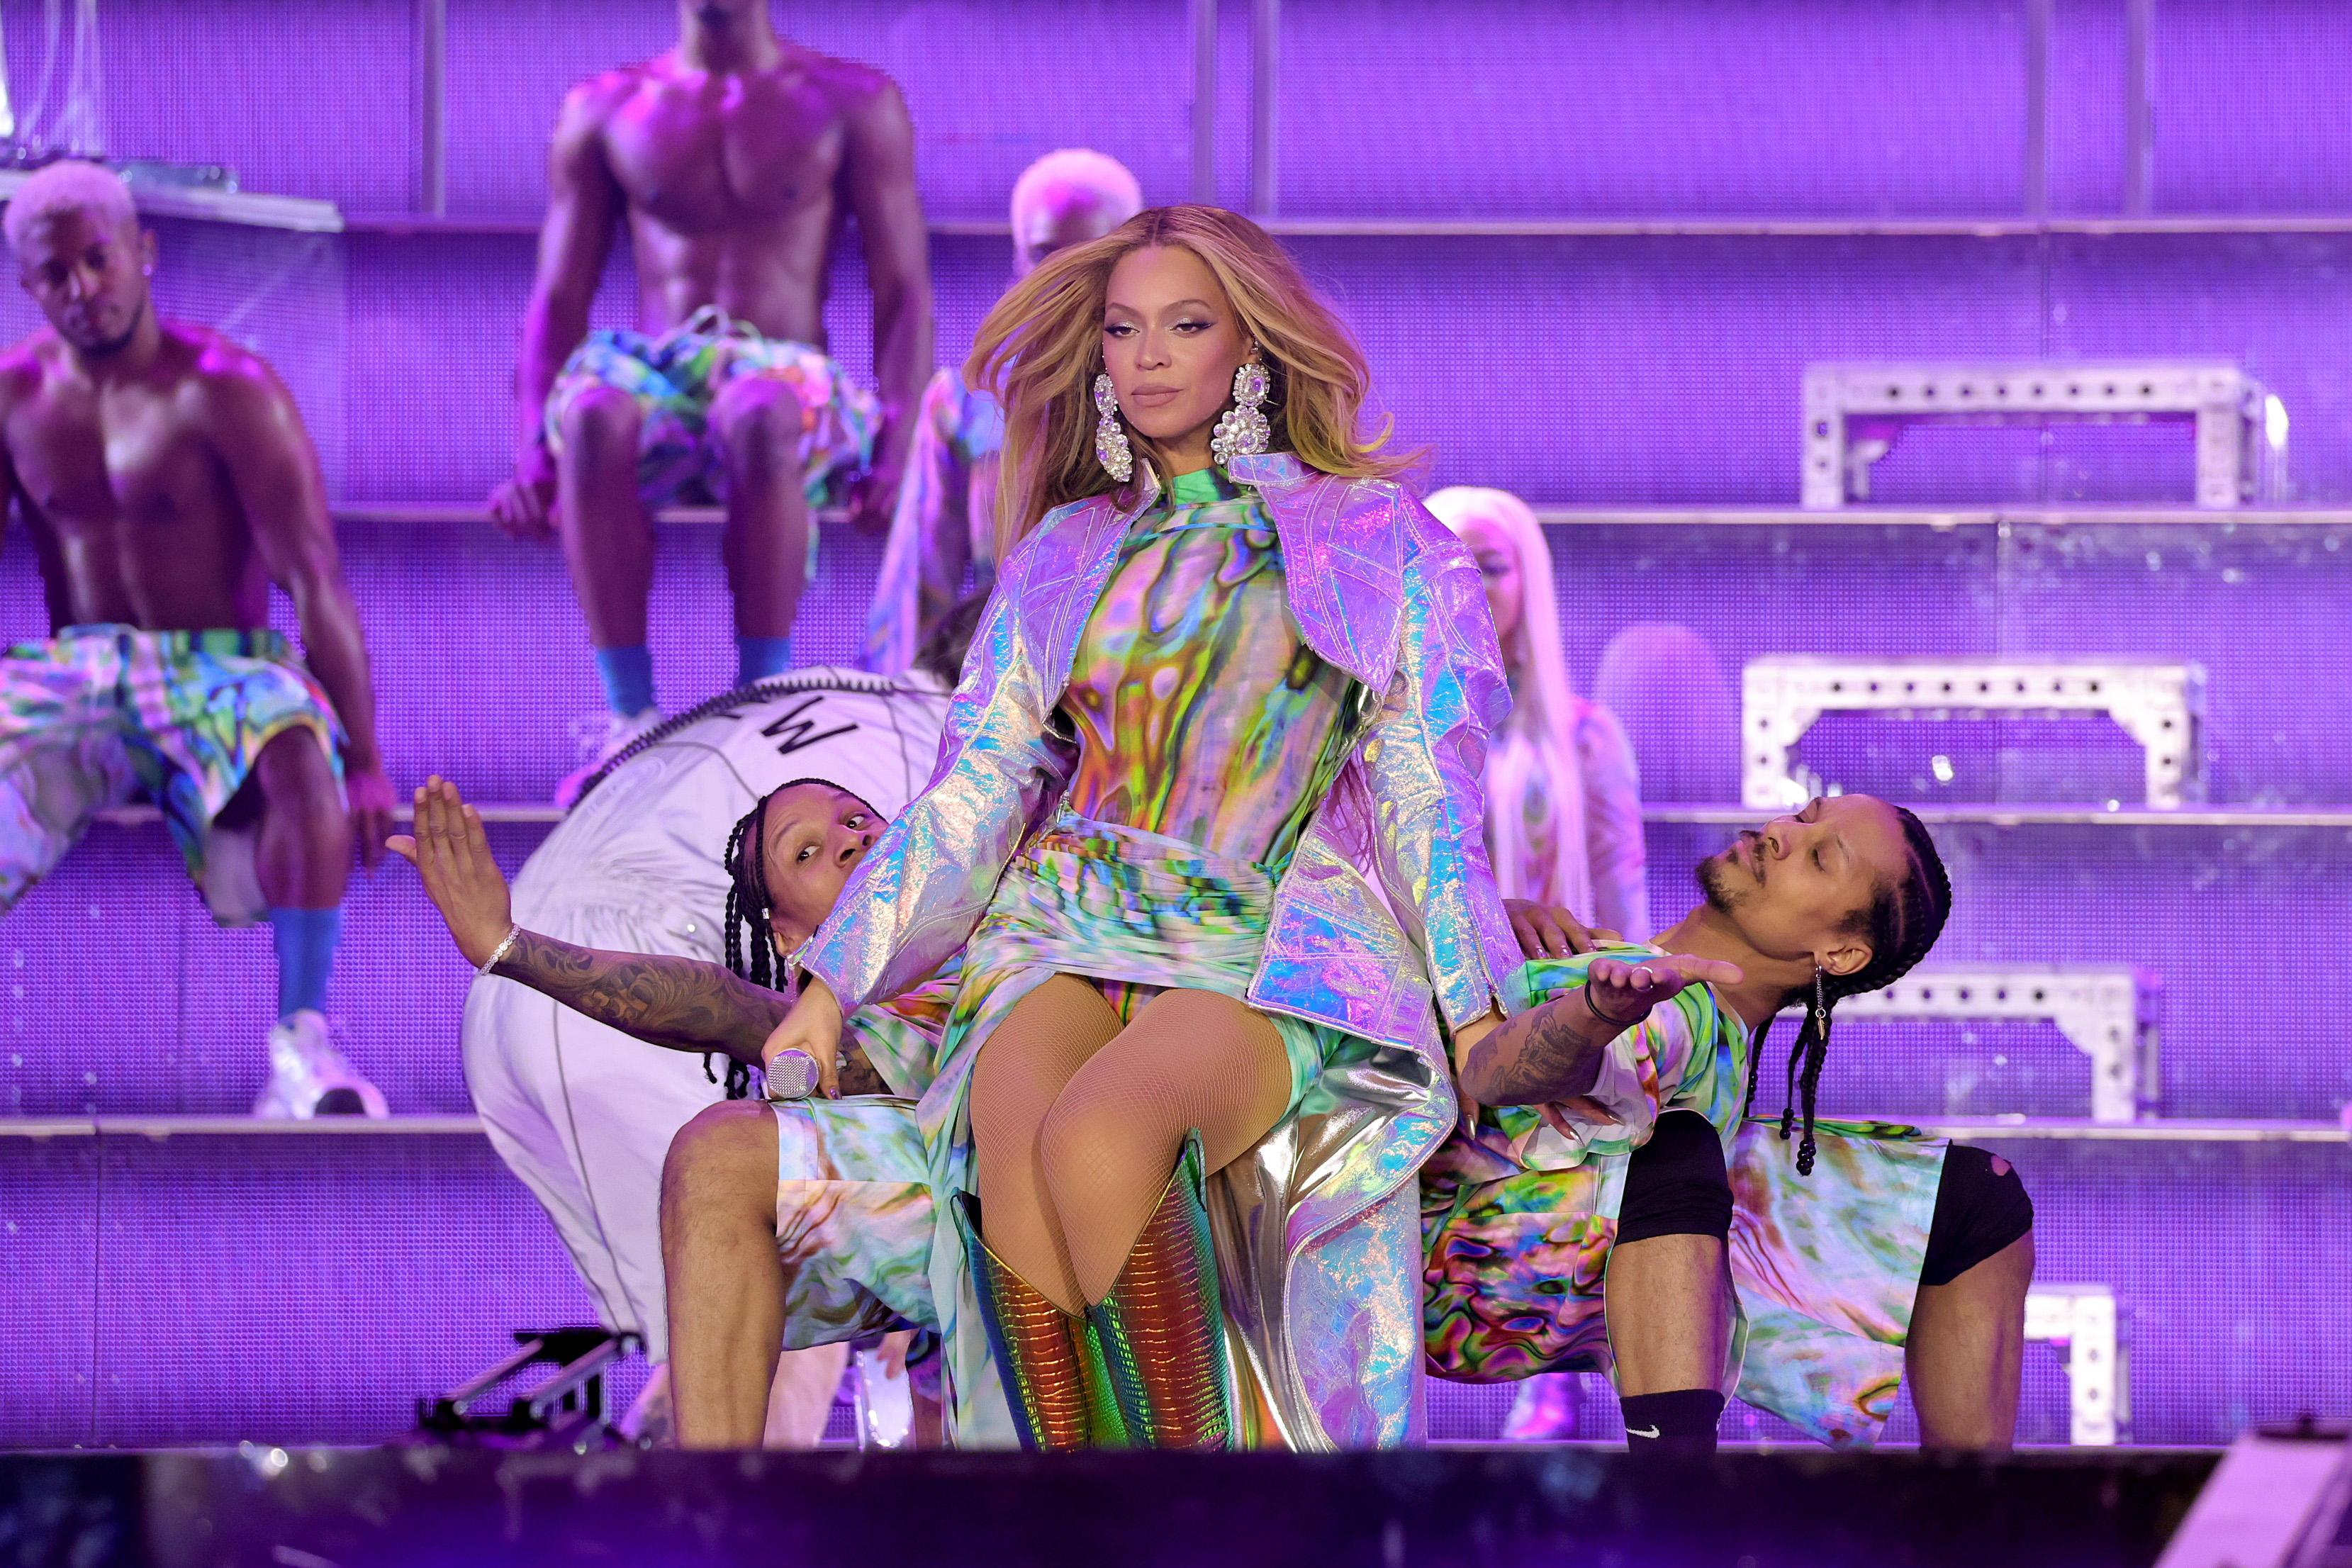 Beyoncé Reminds Fans: “A Queen Moves At Her Own Pace, B*tch”